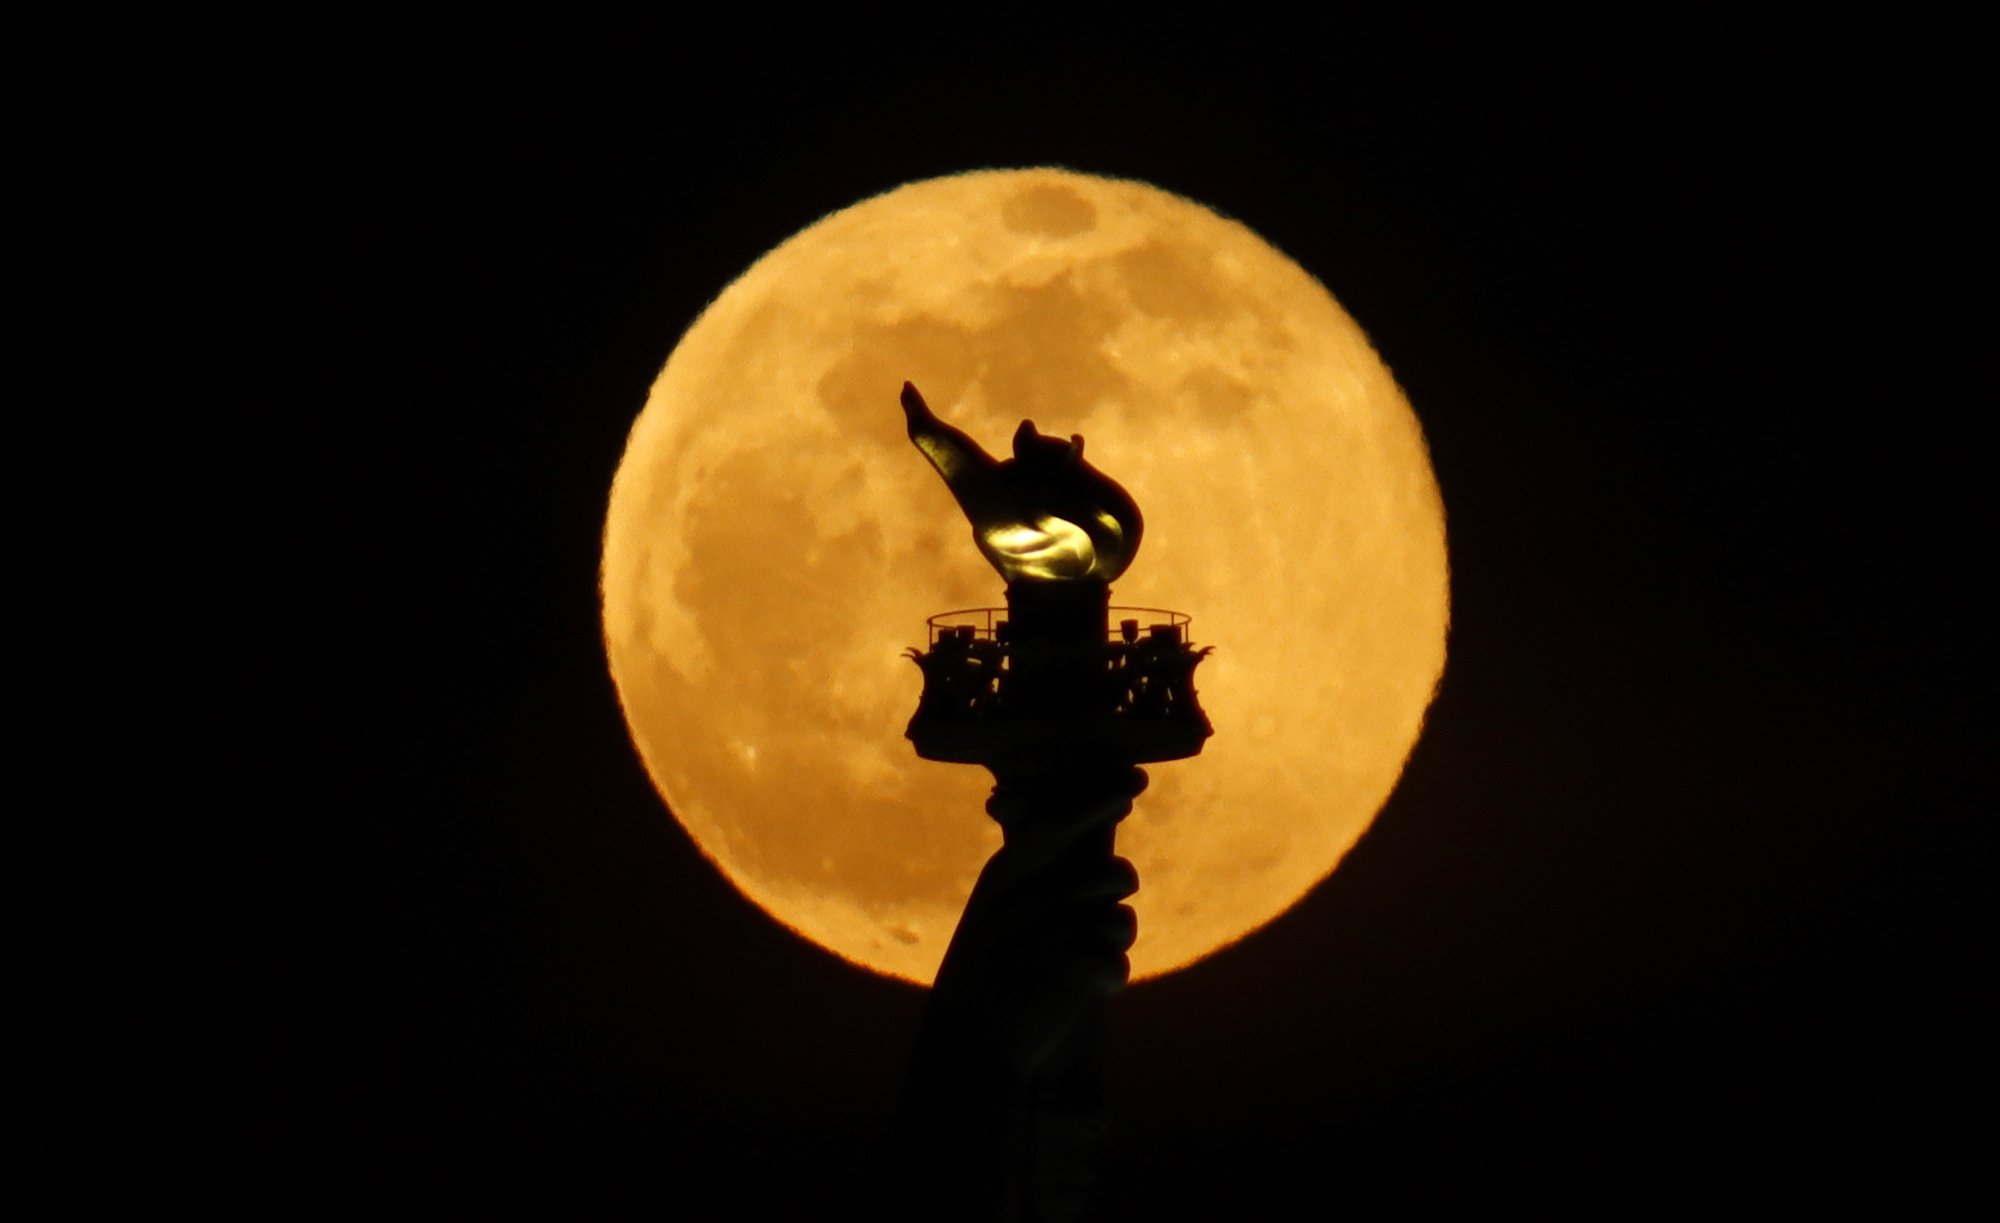 The Statue of Liberty's flame silhouetted against a yellow-tinged full moon.